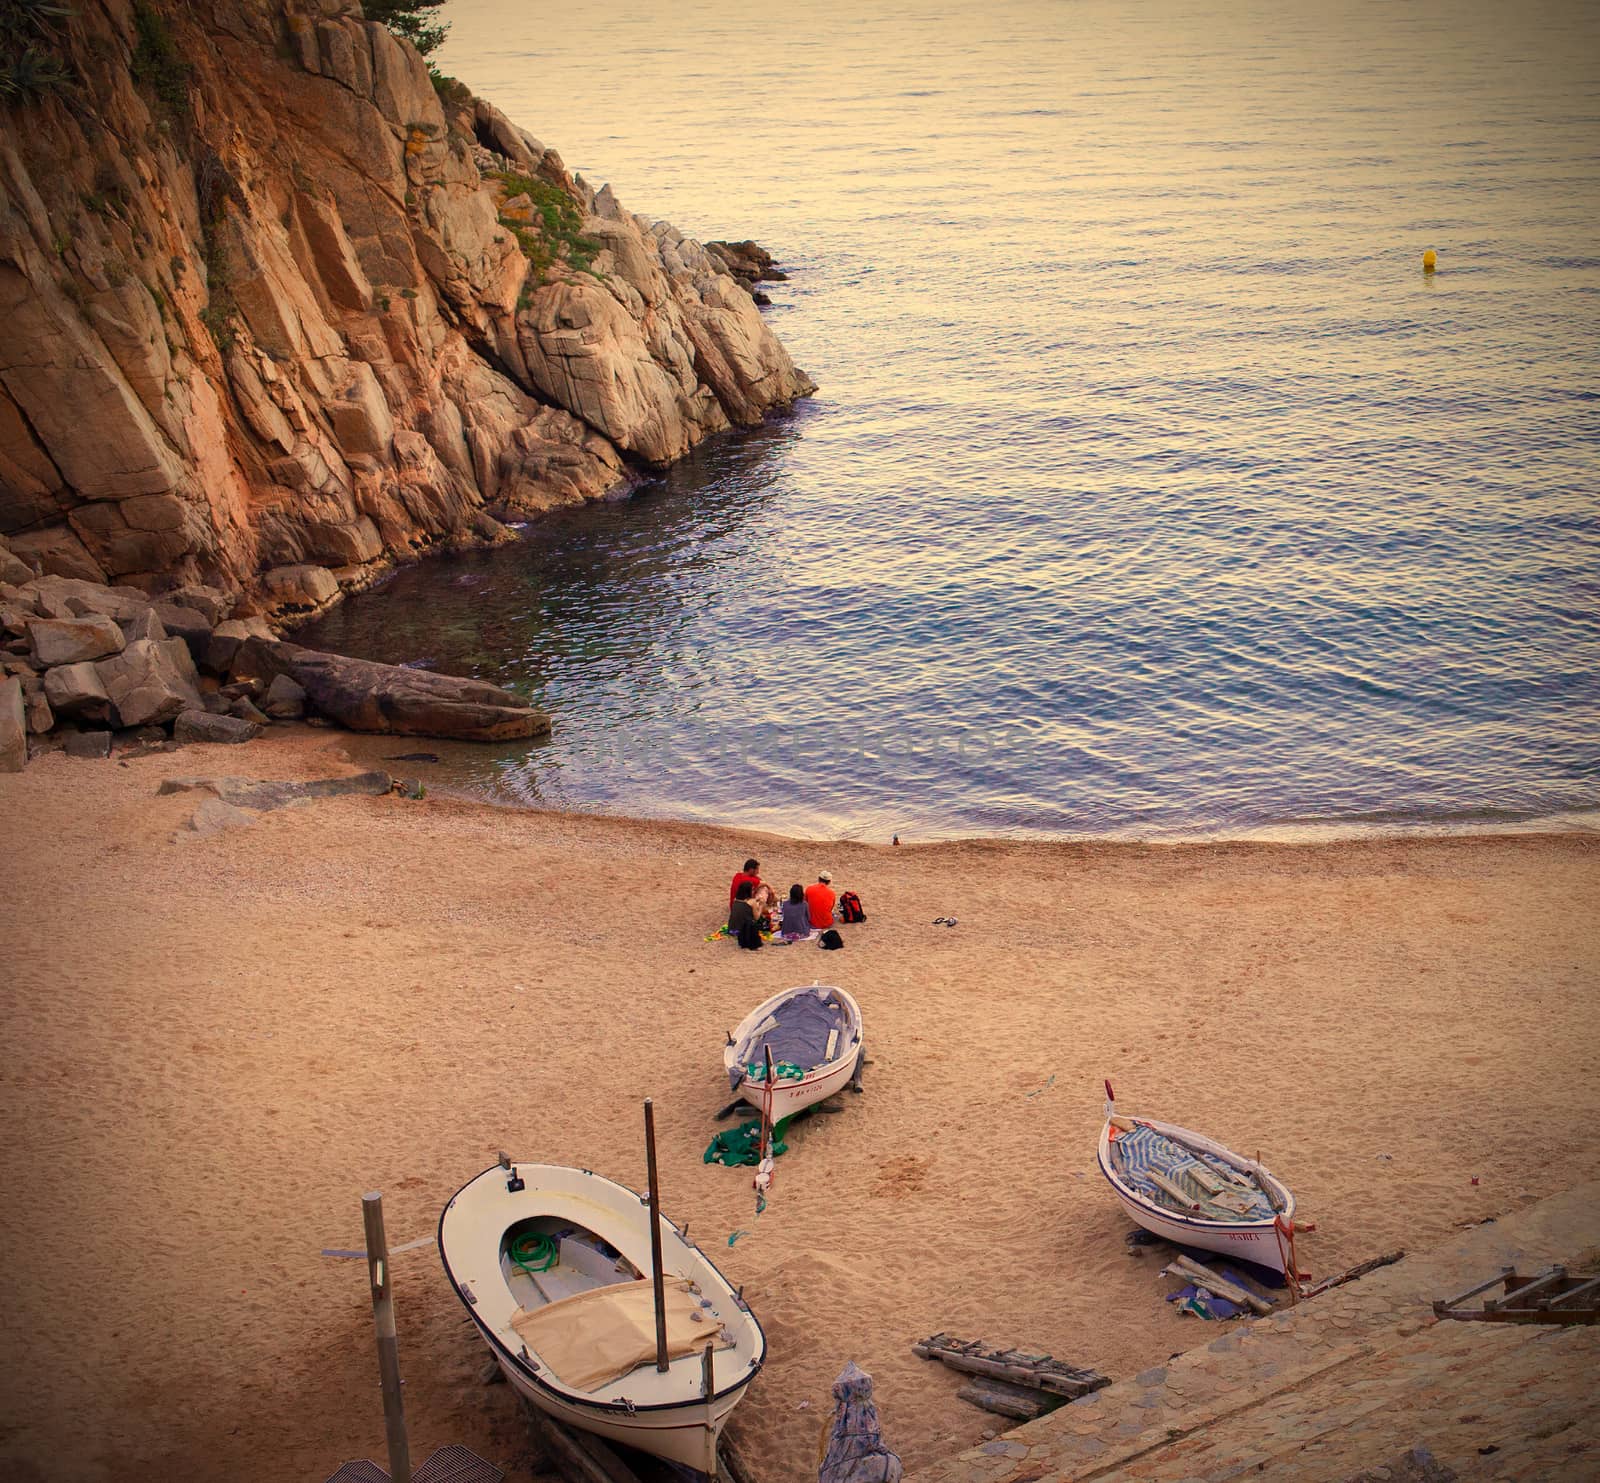 Tossa de Mar, Catalonia, Spain, 2014.06.16, a quiet evening on the beach with white boats, instagram image style